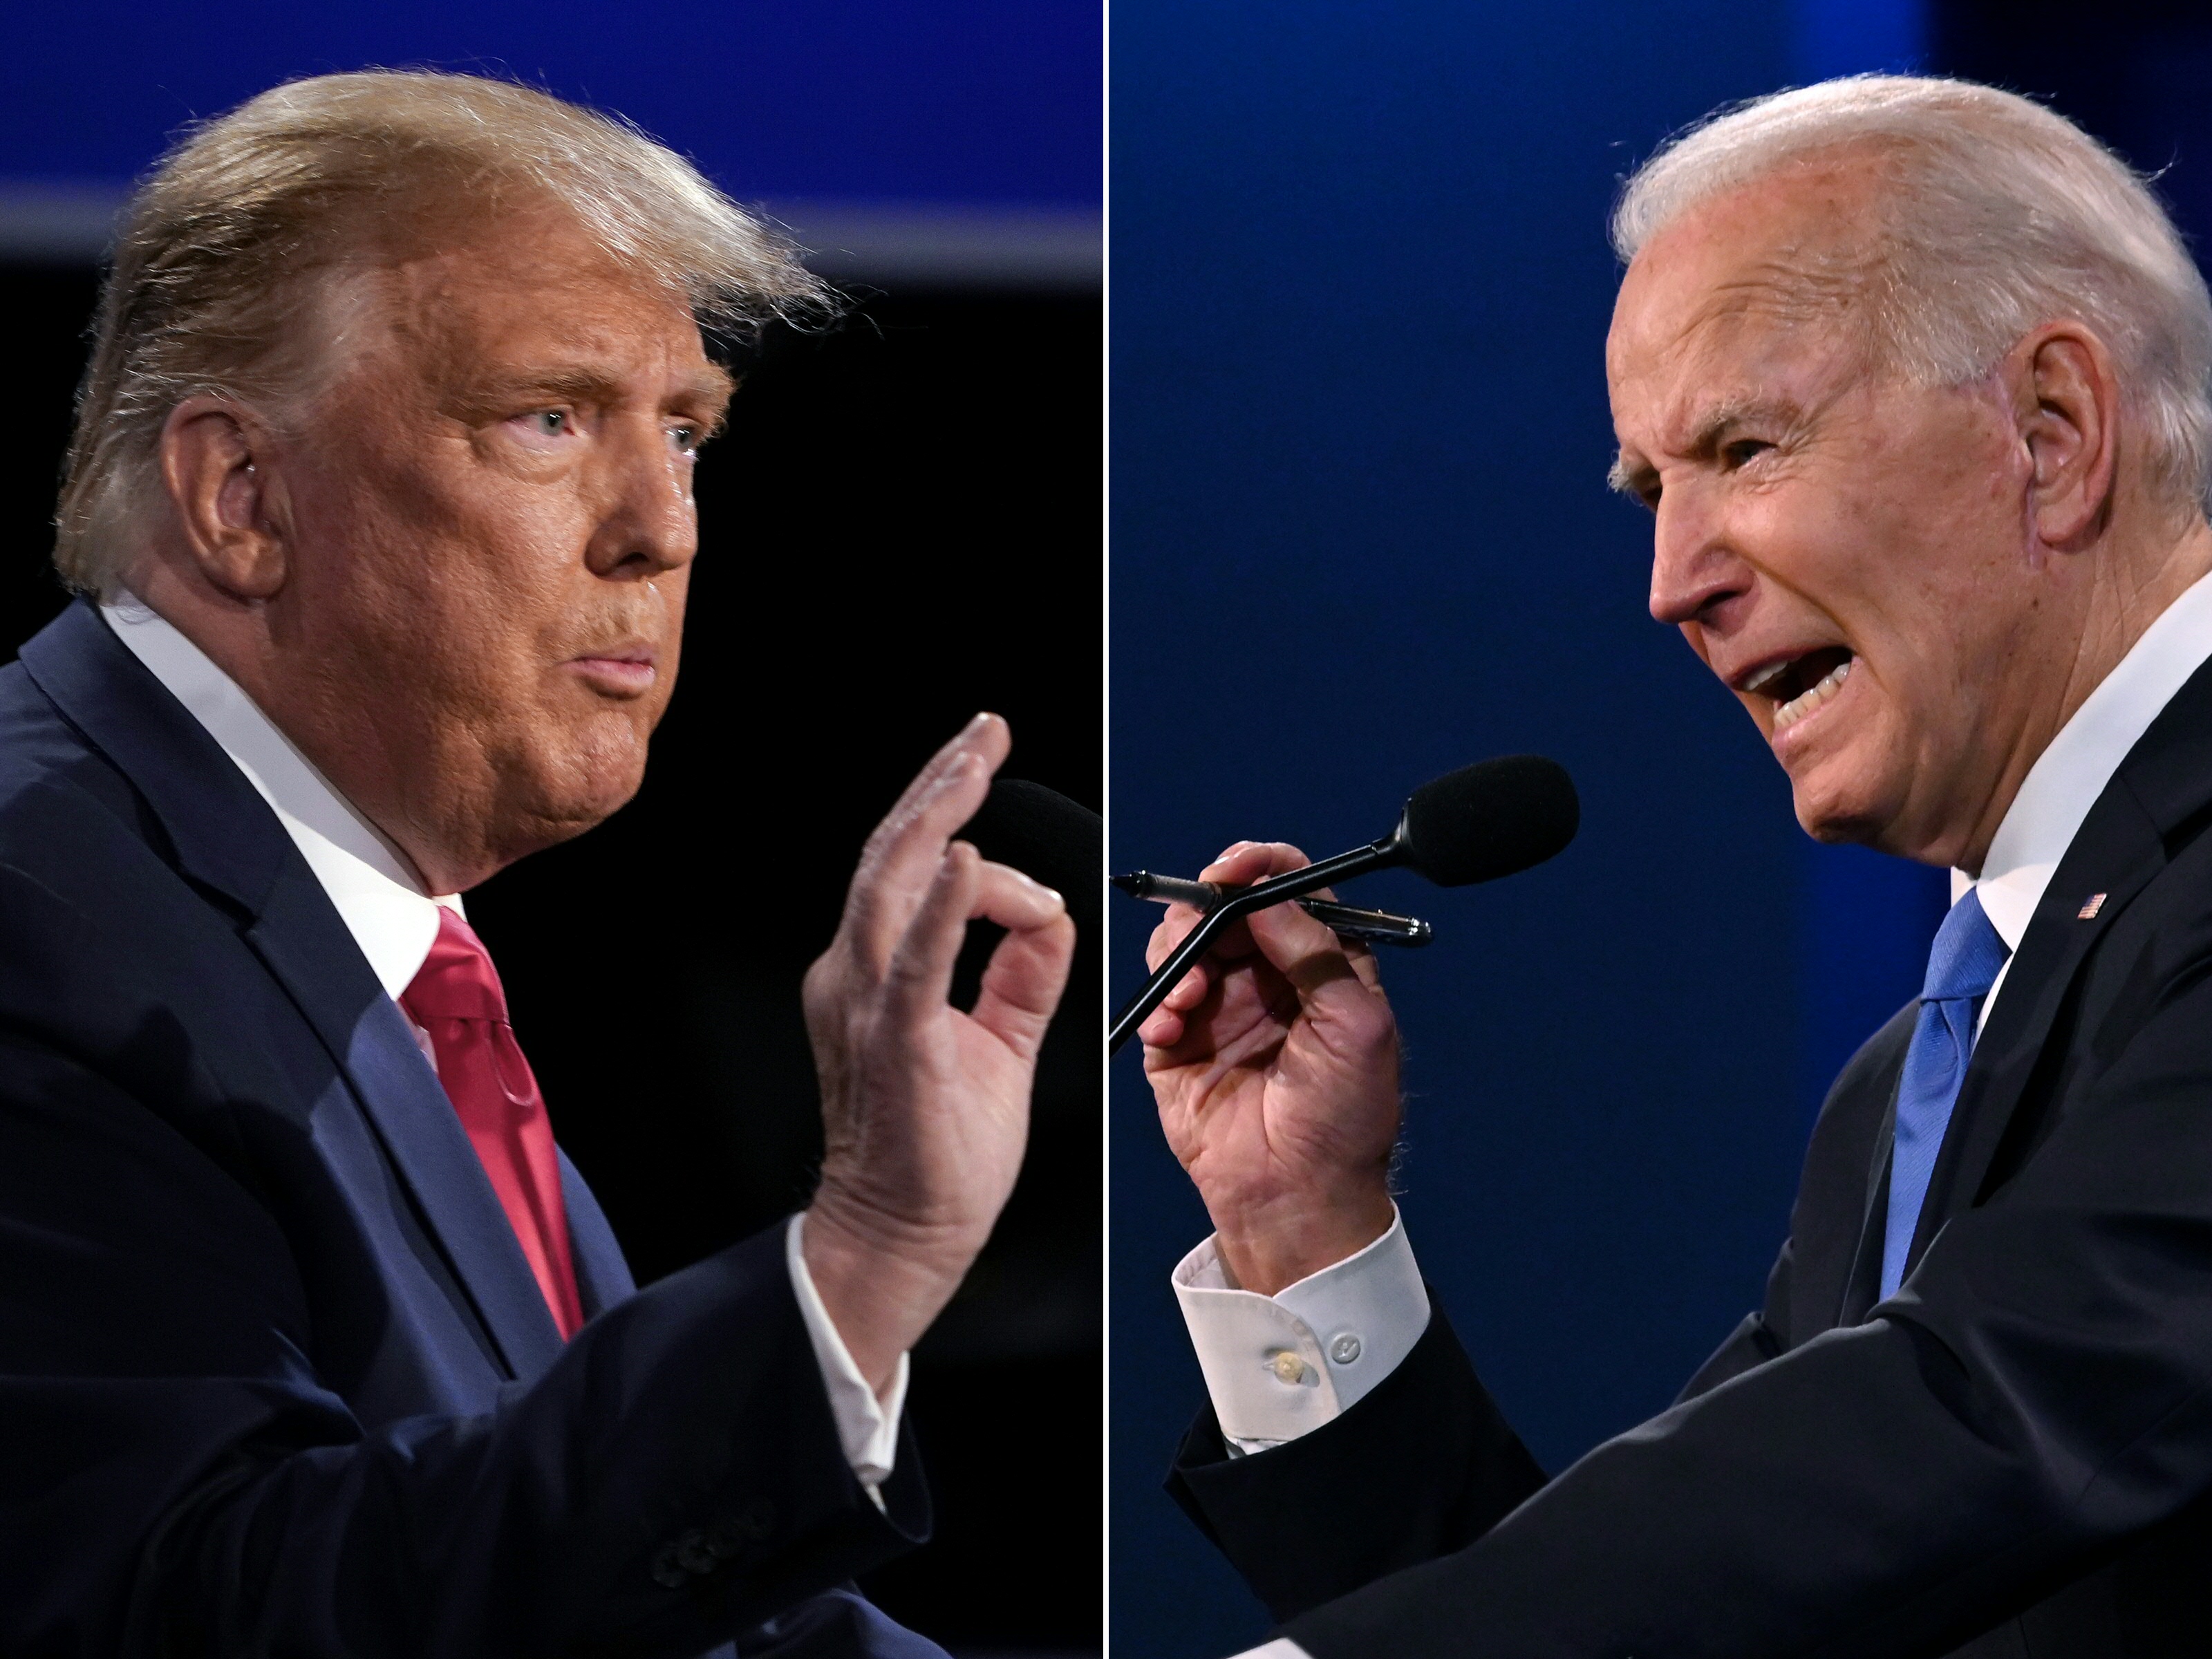 The eventual rematch between Biden and Trump will try America's resolve and forbearance.